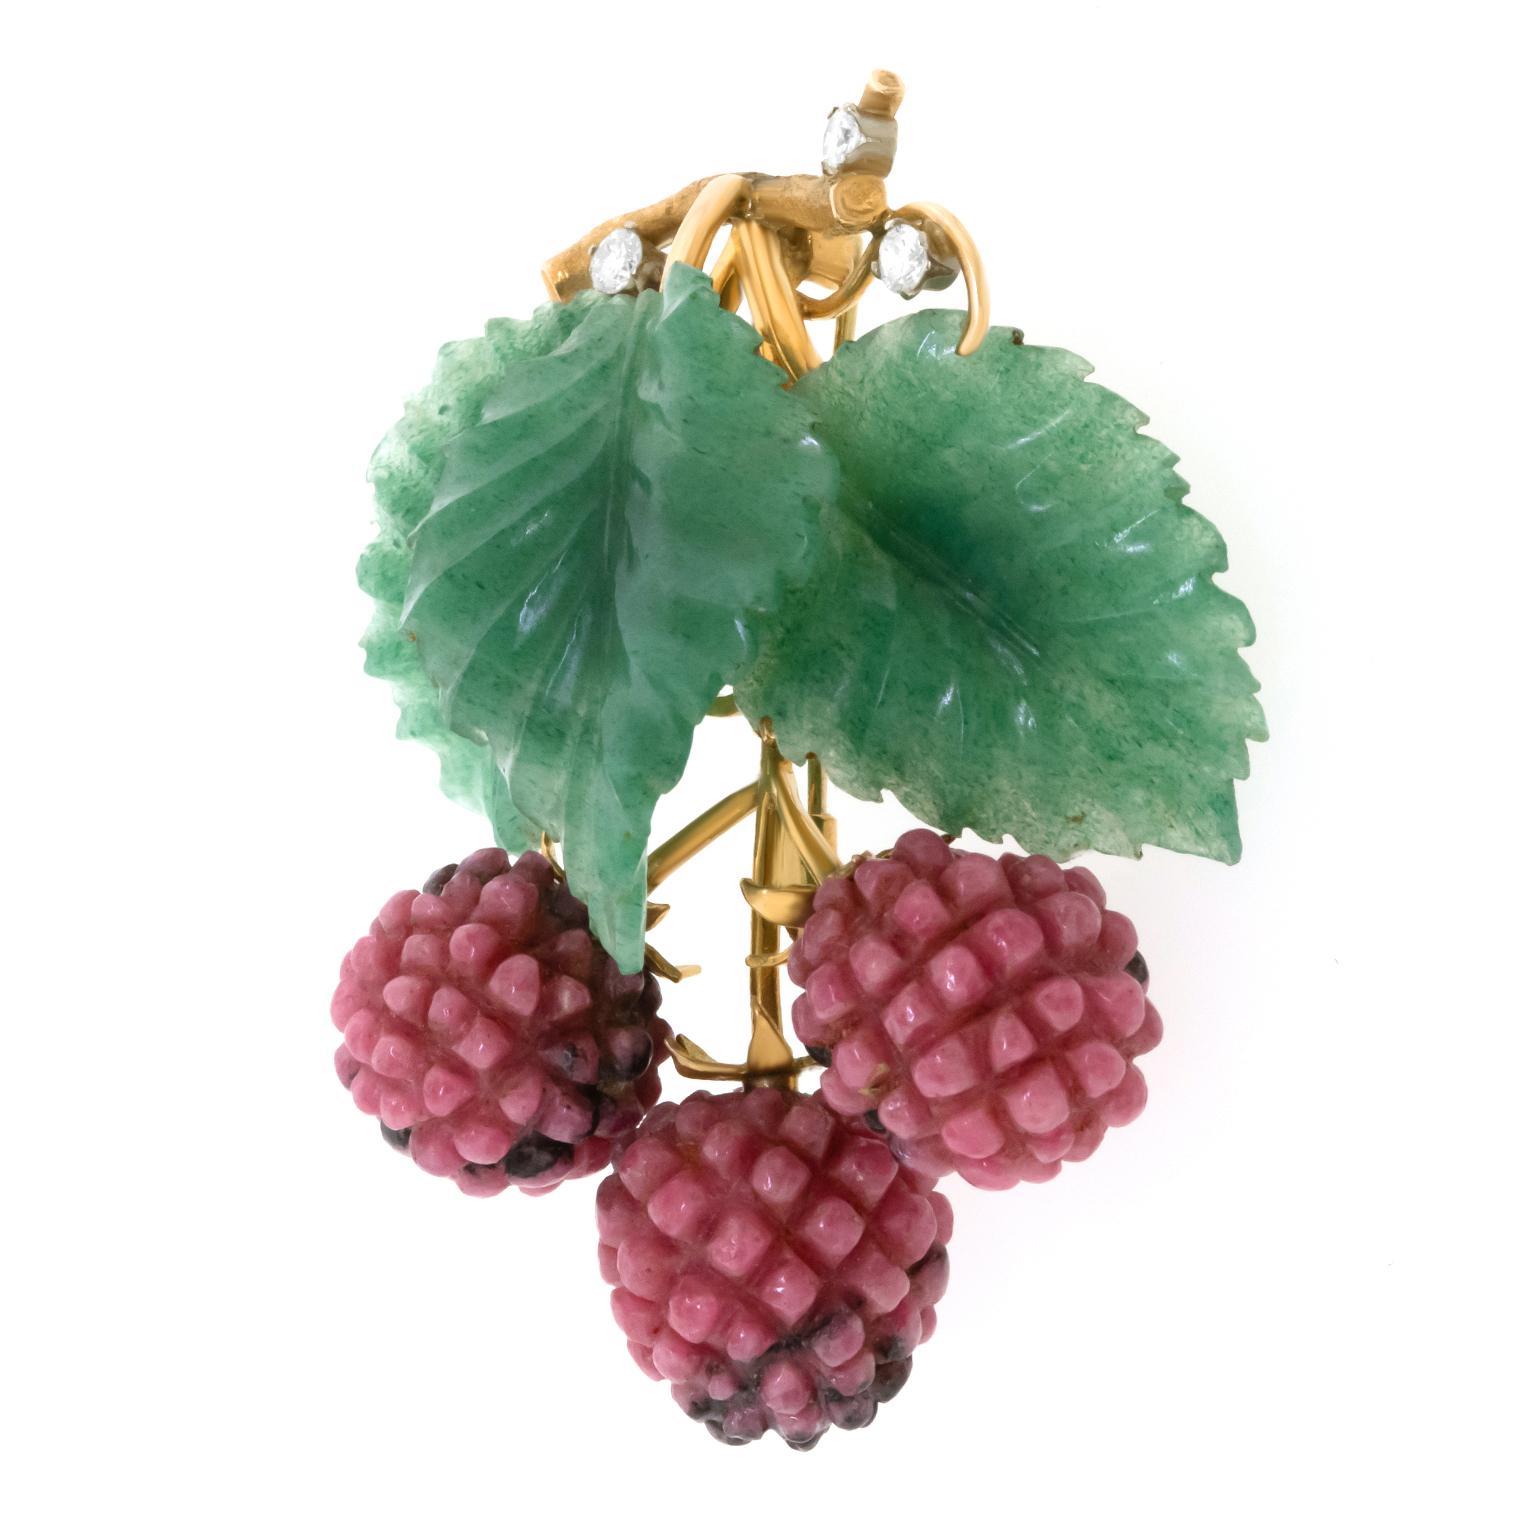 Art Deco Blackberry Brooch In Excellent Condition For Sale In Litchfield, CT